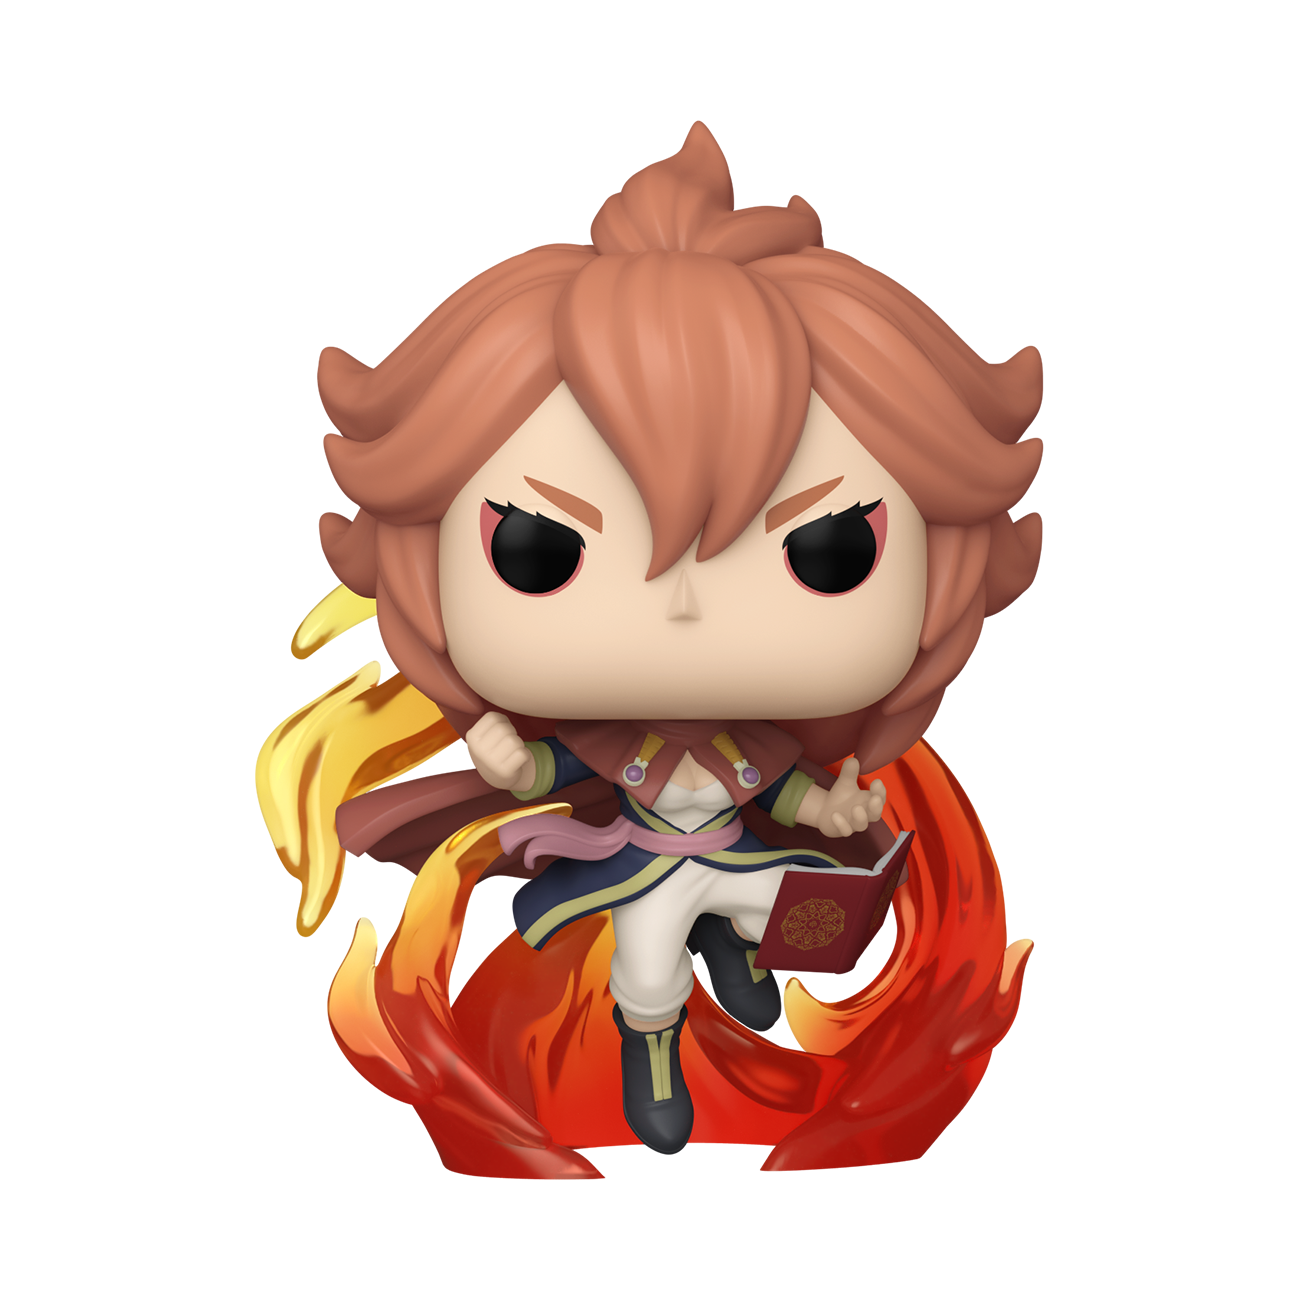 Black Clover - Mereoleona with Flame Fists Funko Pop! image count 2